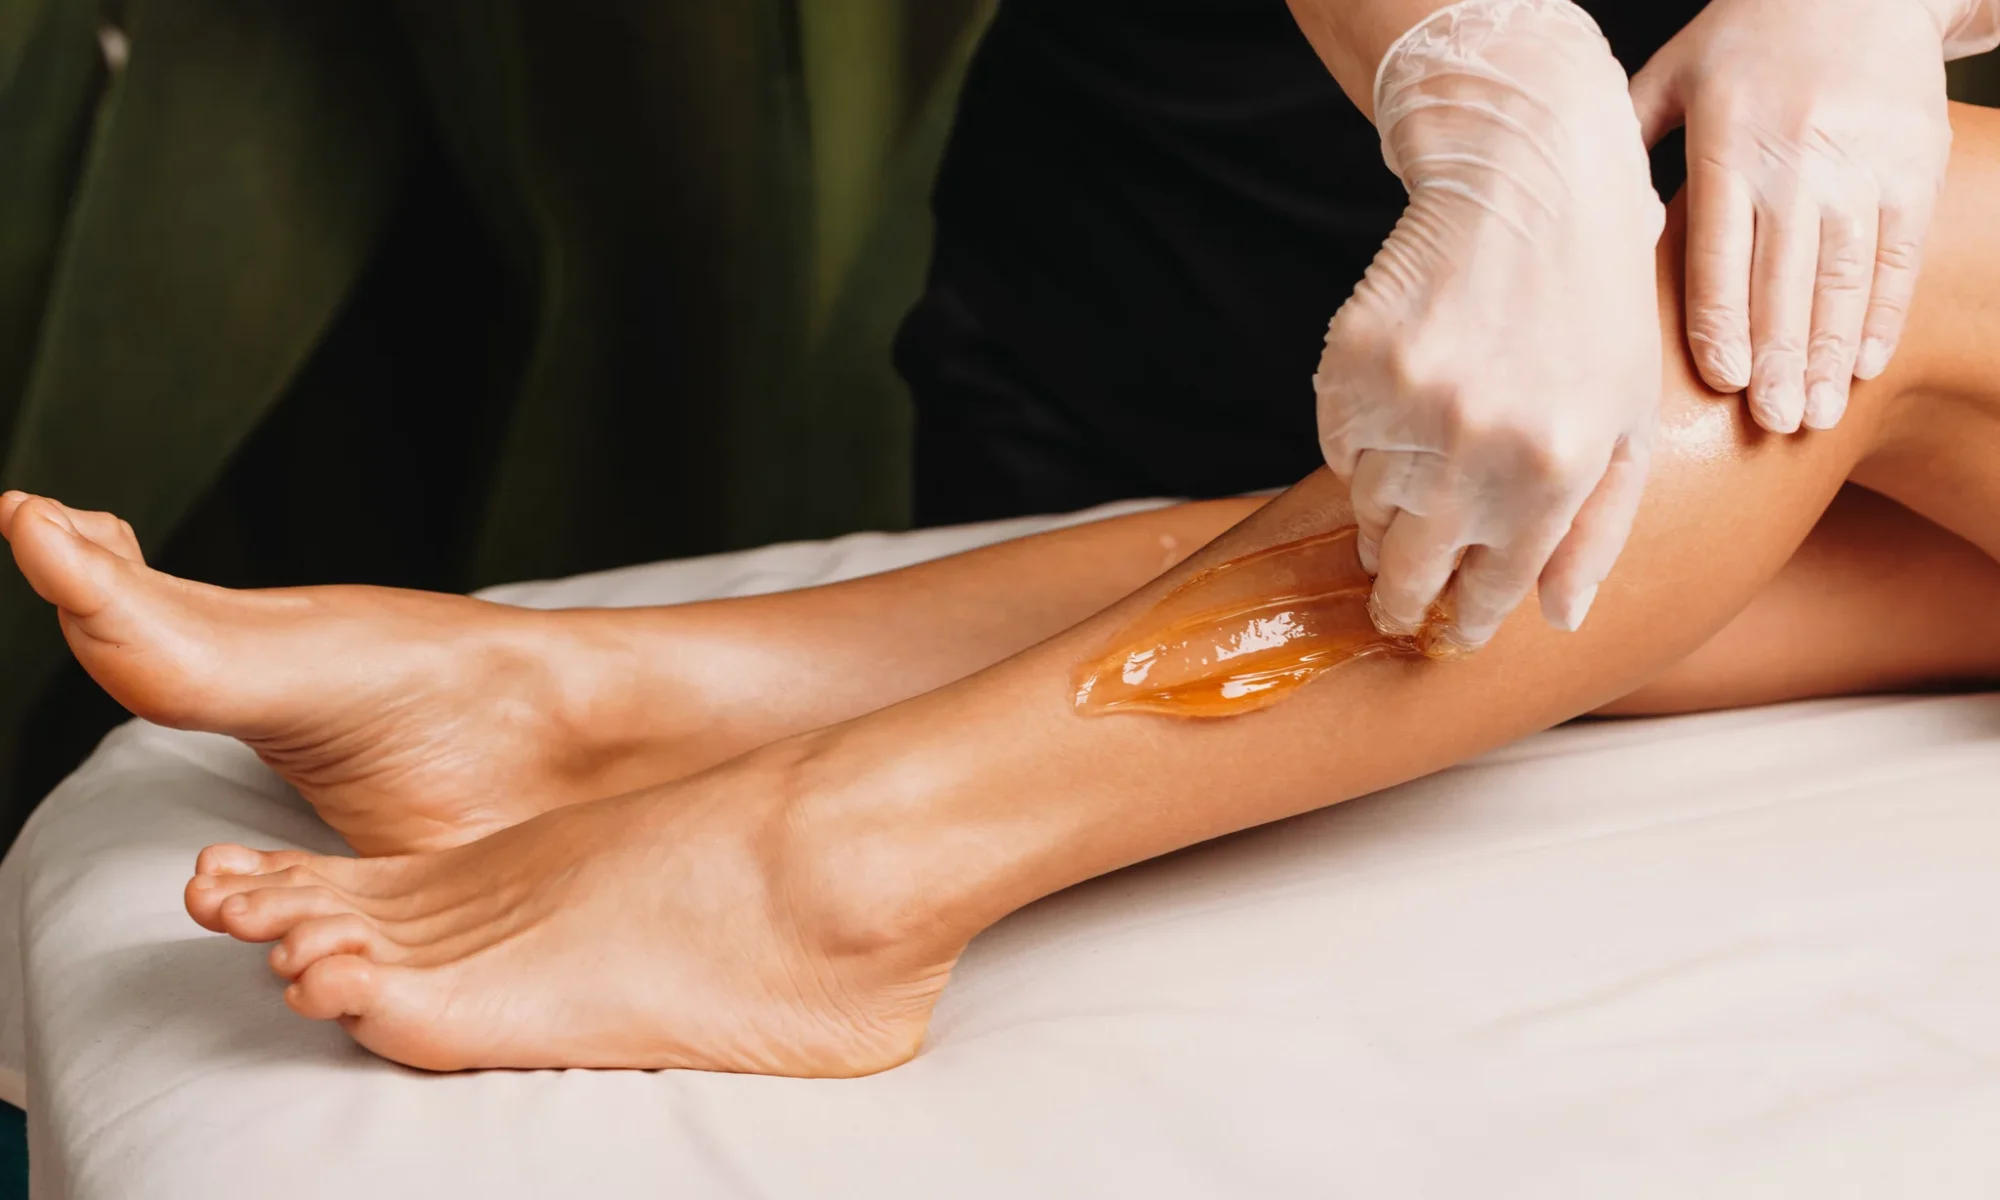 Waxing Sugaring Course Niagara St. Catharines Hair Removal Beauty Courses